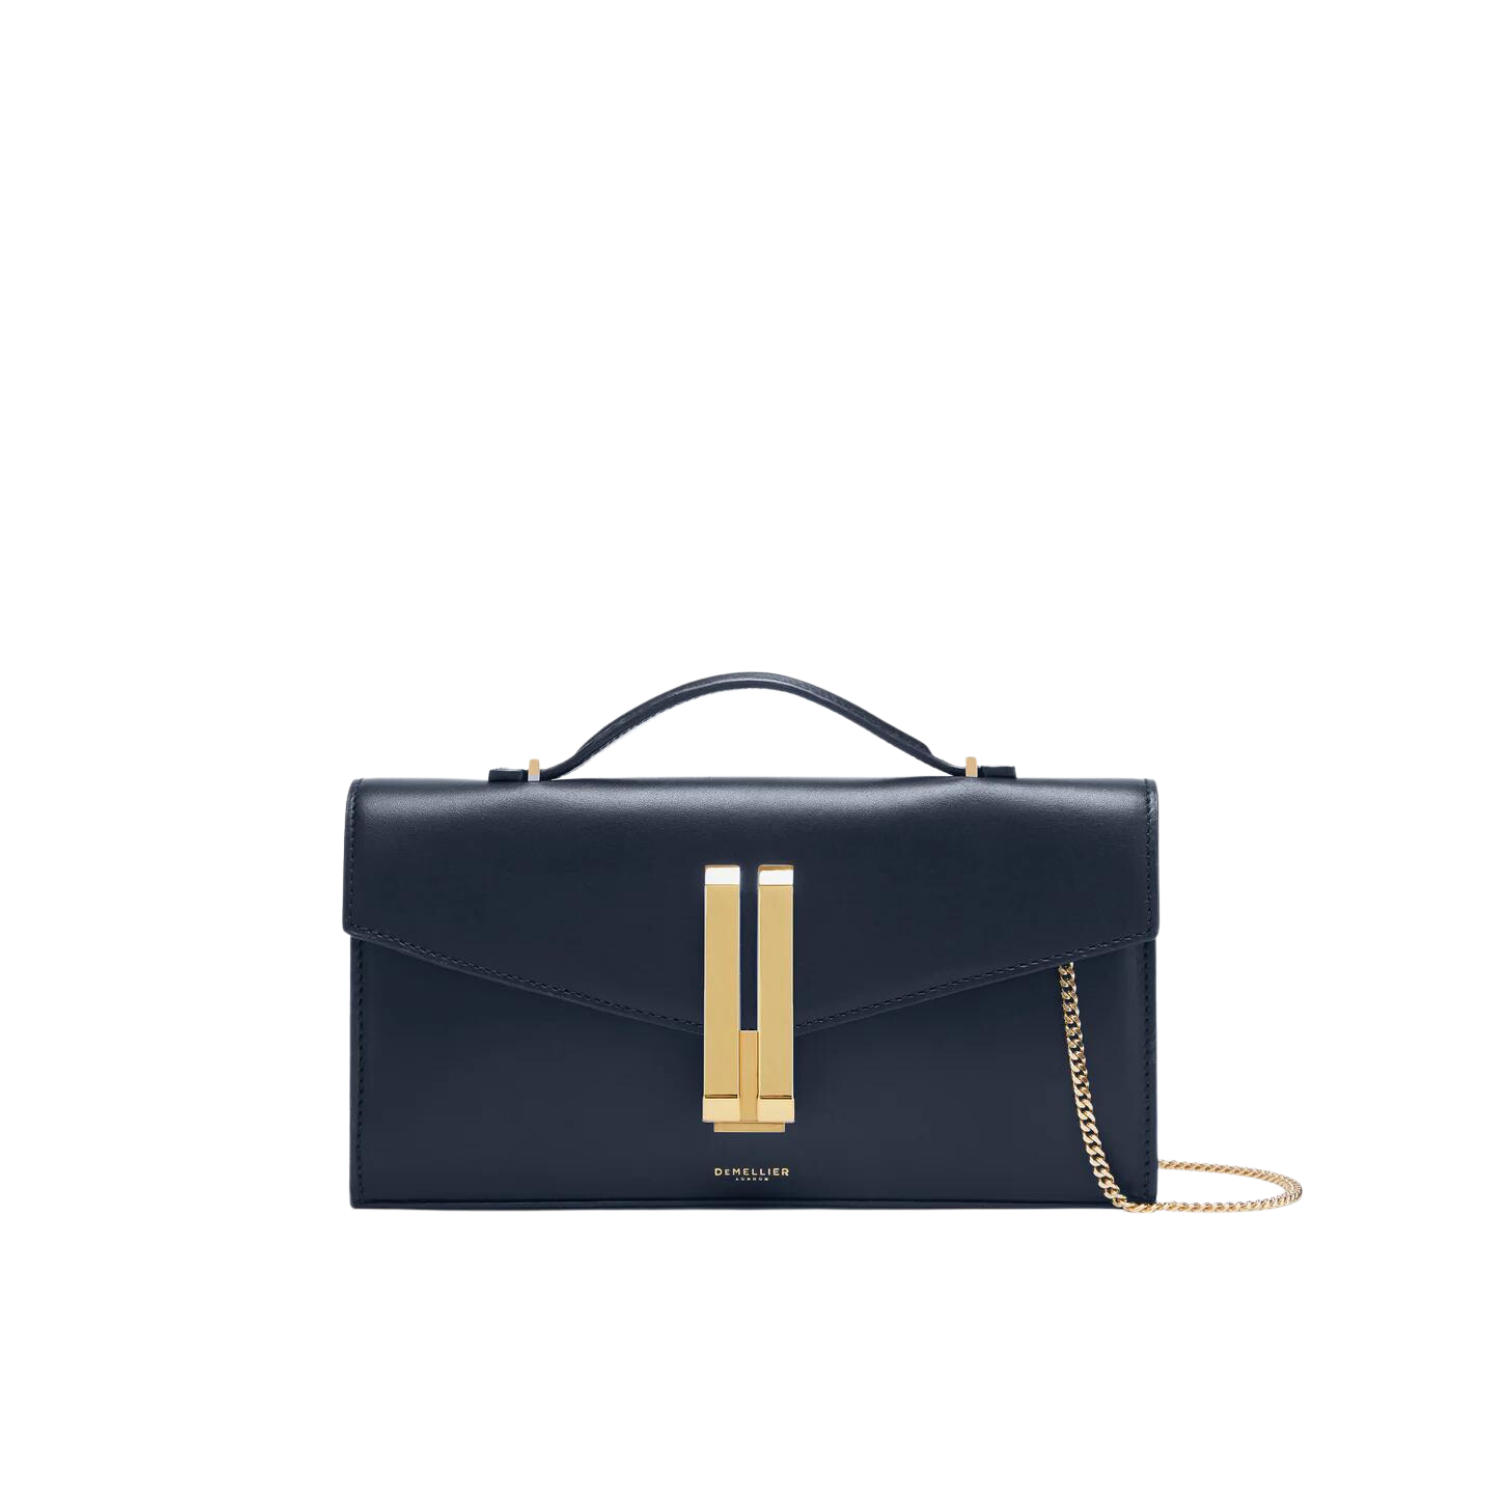 DeMellier The Vancouver Clutch, $460